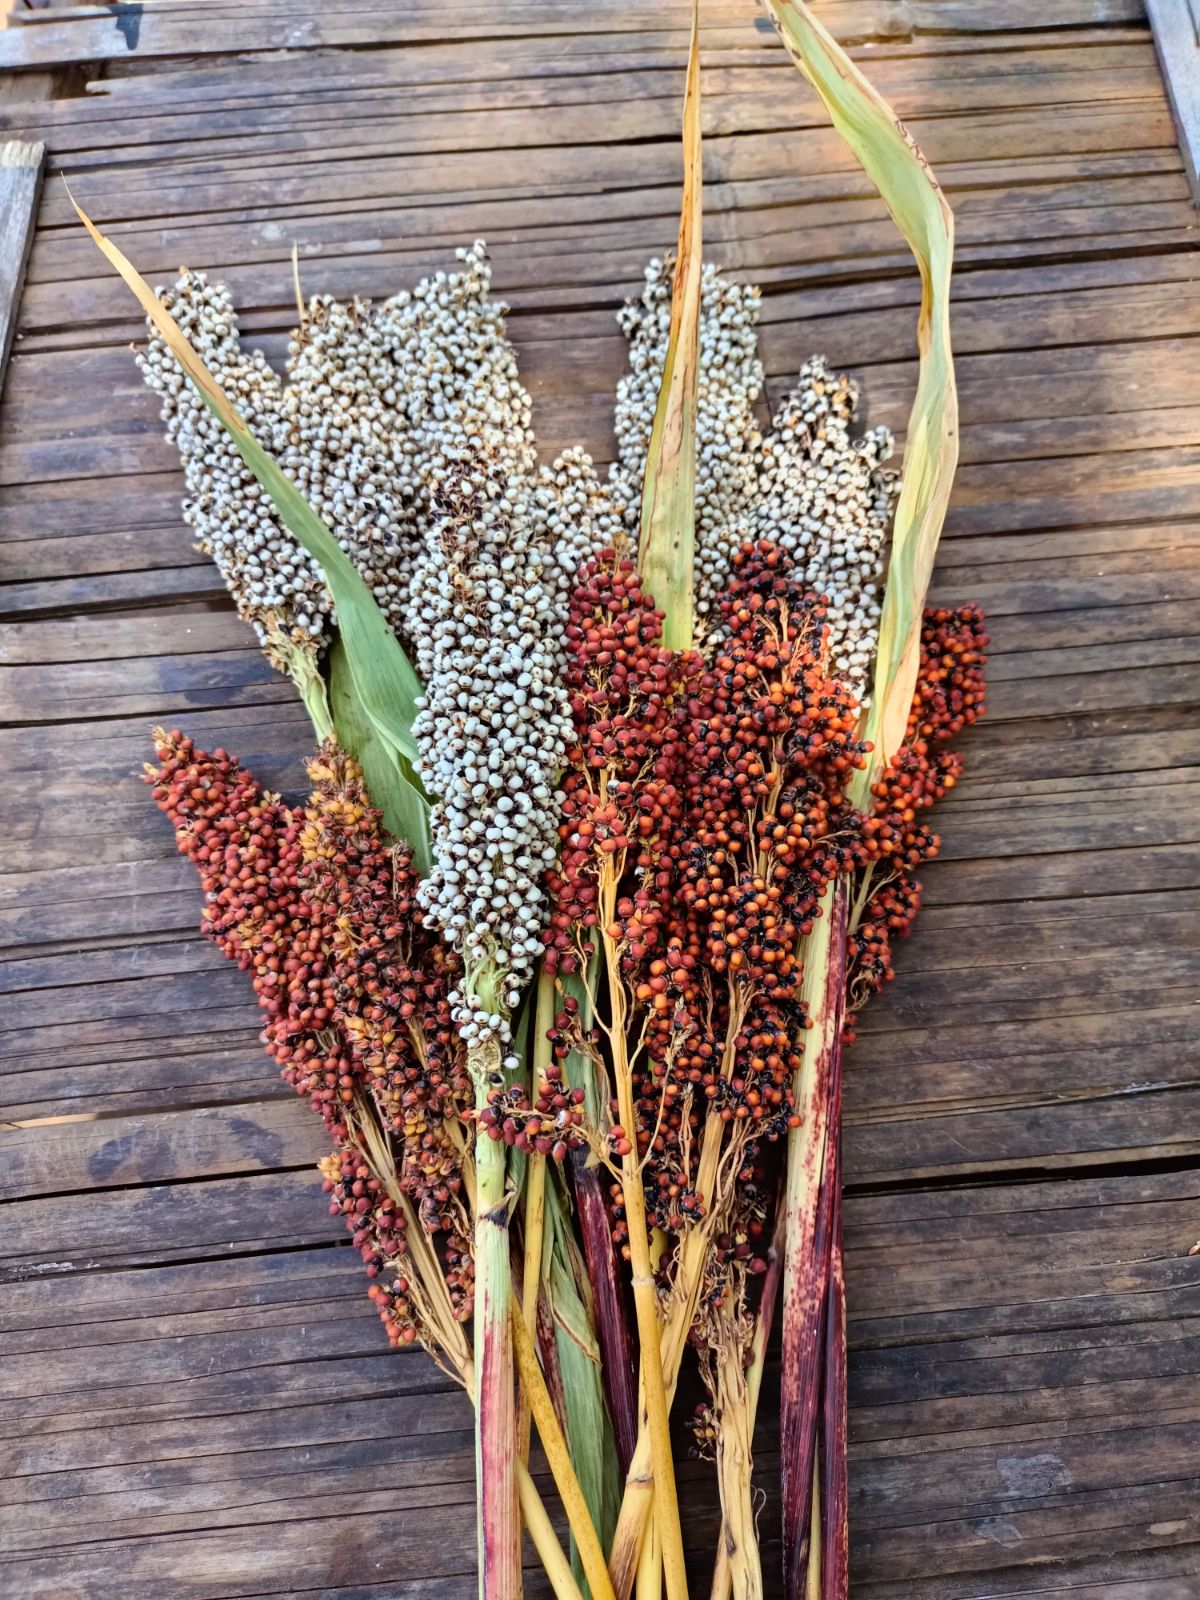 Sorghum with seeds still on the stalks